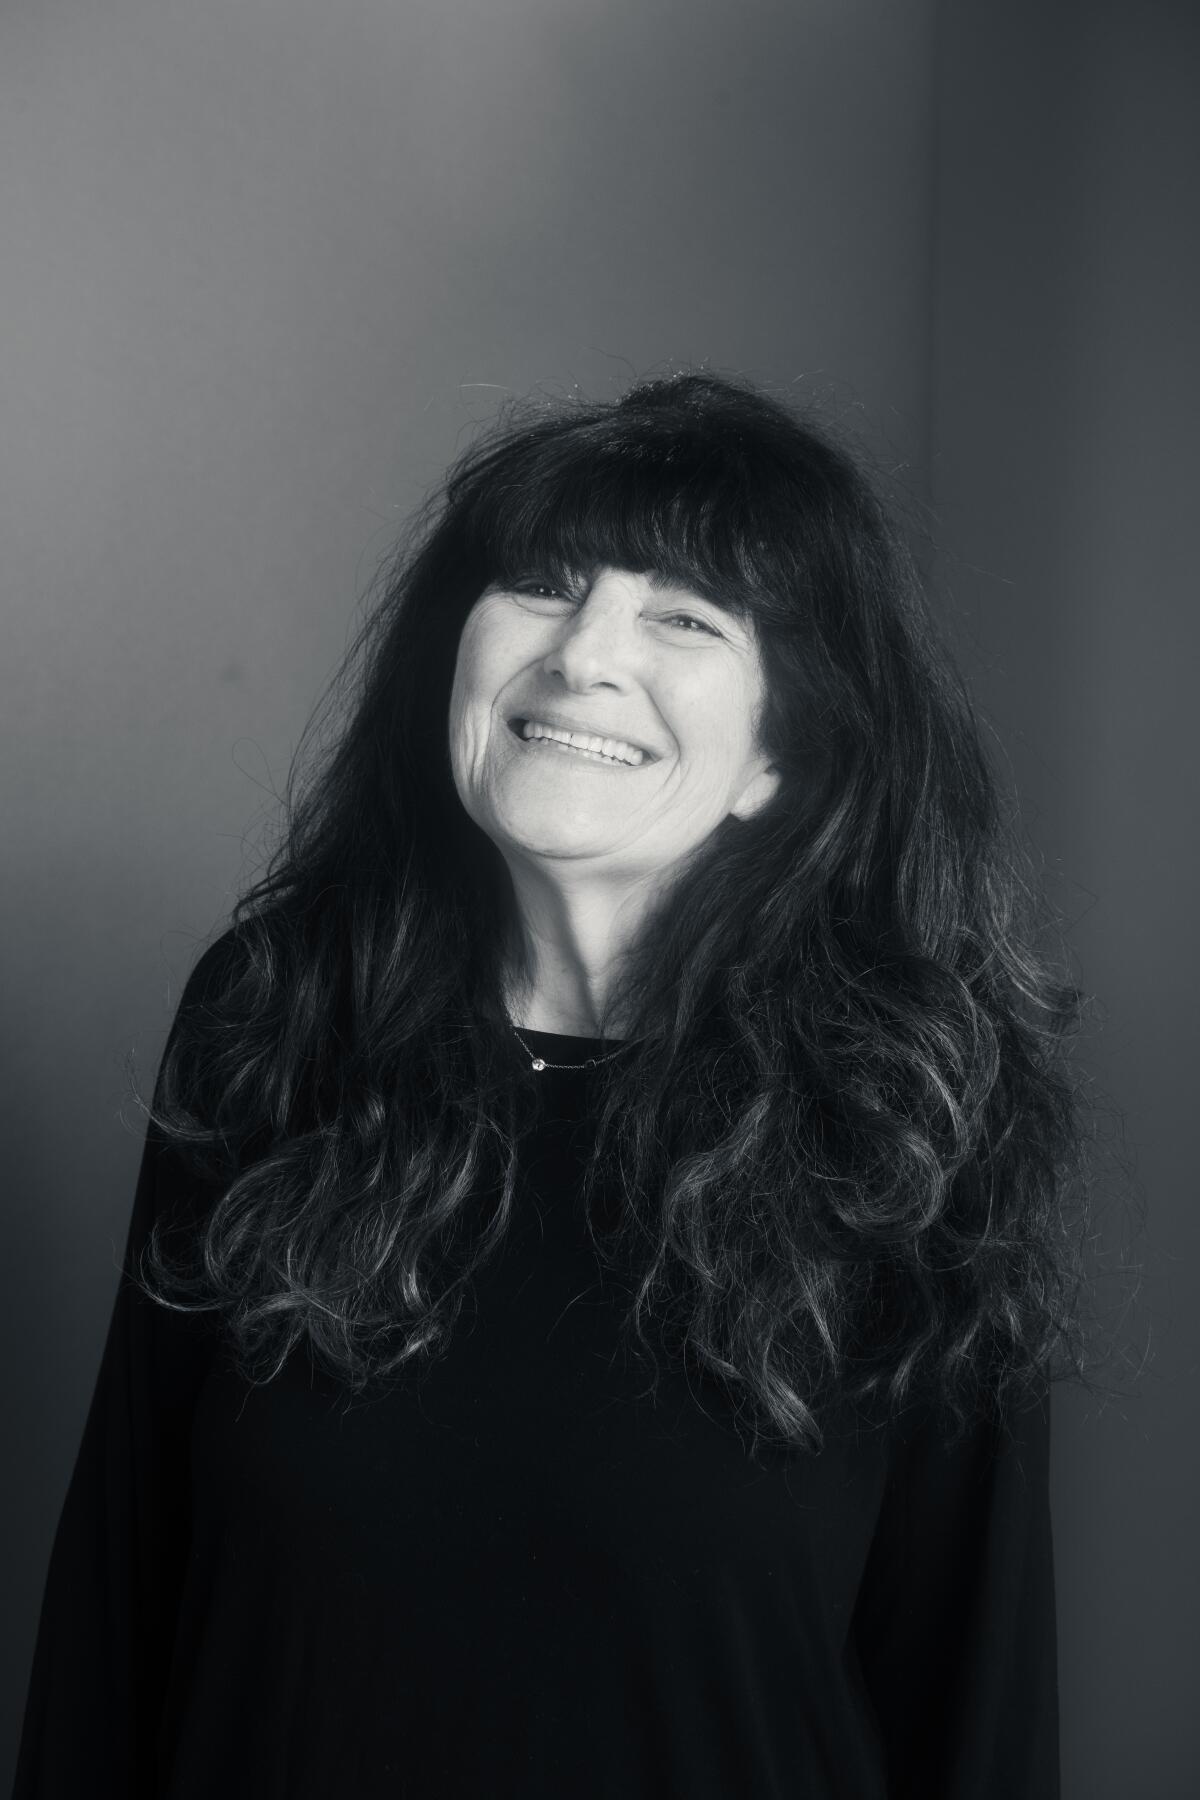 A vertical portrait of Ruth Reichl, photographed smiling and in black and white